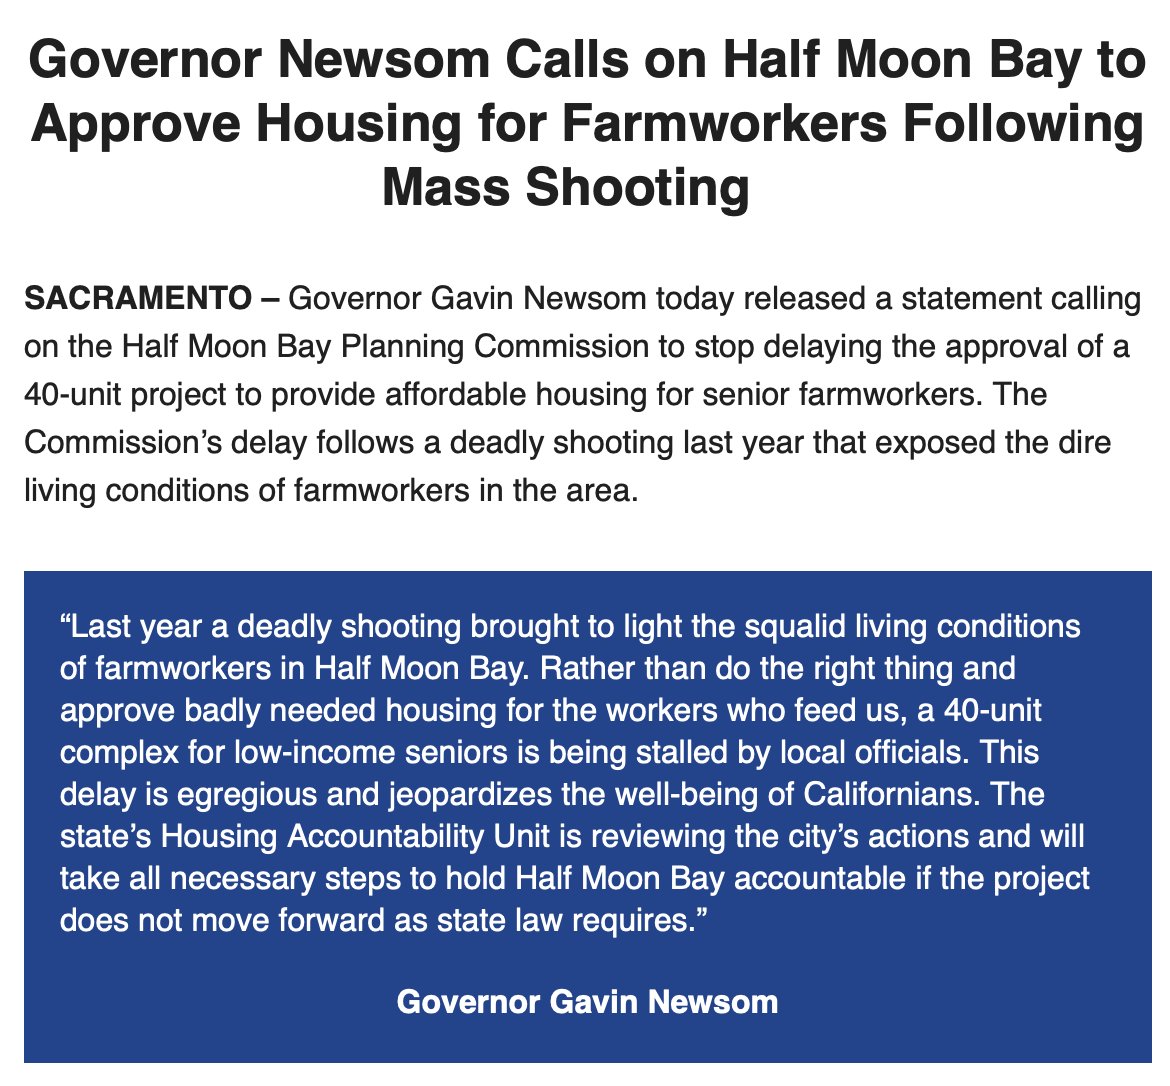 For weeks, the Half Moon Bay planning commission has been delaying a 100% affordable housing project for senior farmworkers, criticizing it over concerns about parking, height, and impact on coastal views. Now, even Gov. @GavinNewsom is joining those calling for its approval!